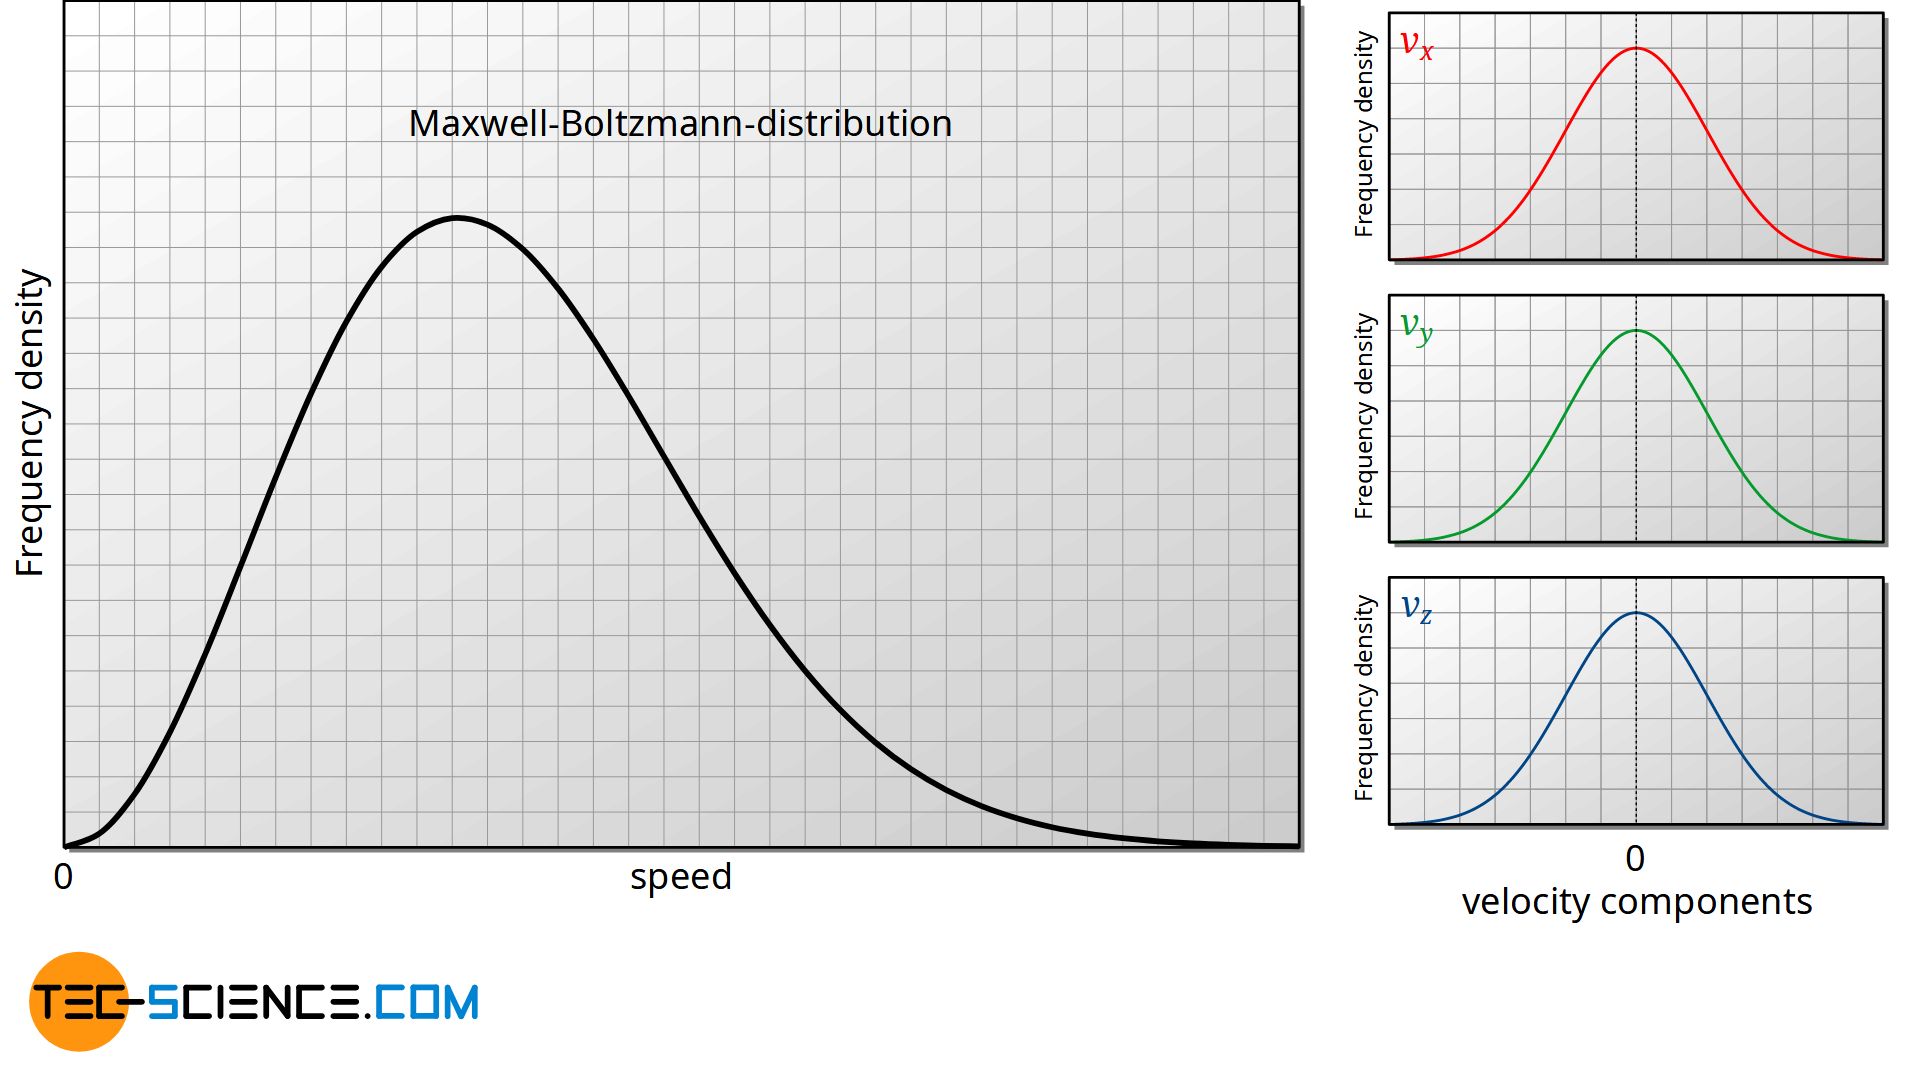 Comparison between the distribution of the speed and the velocity components